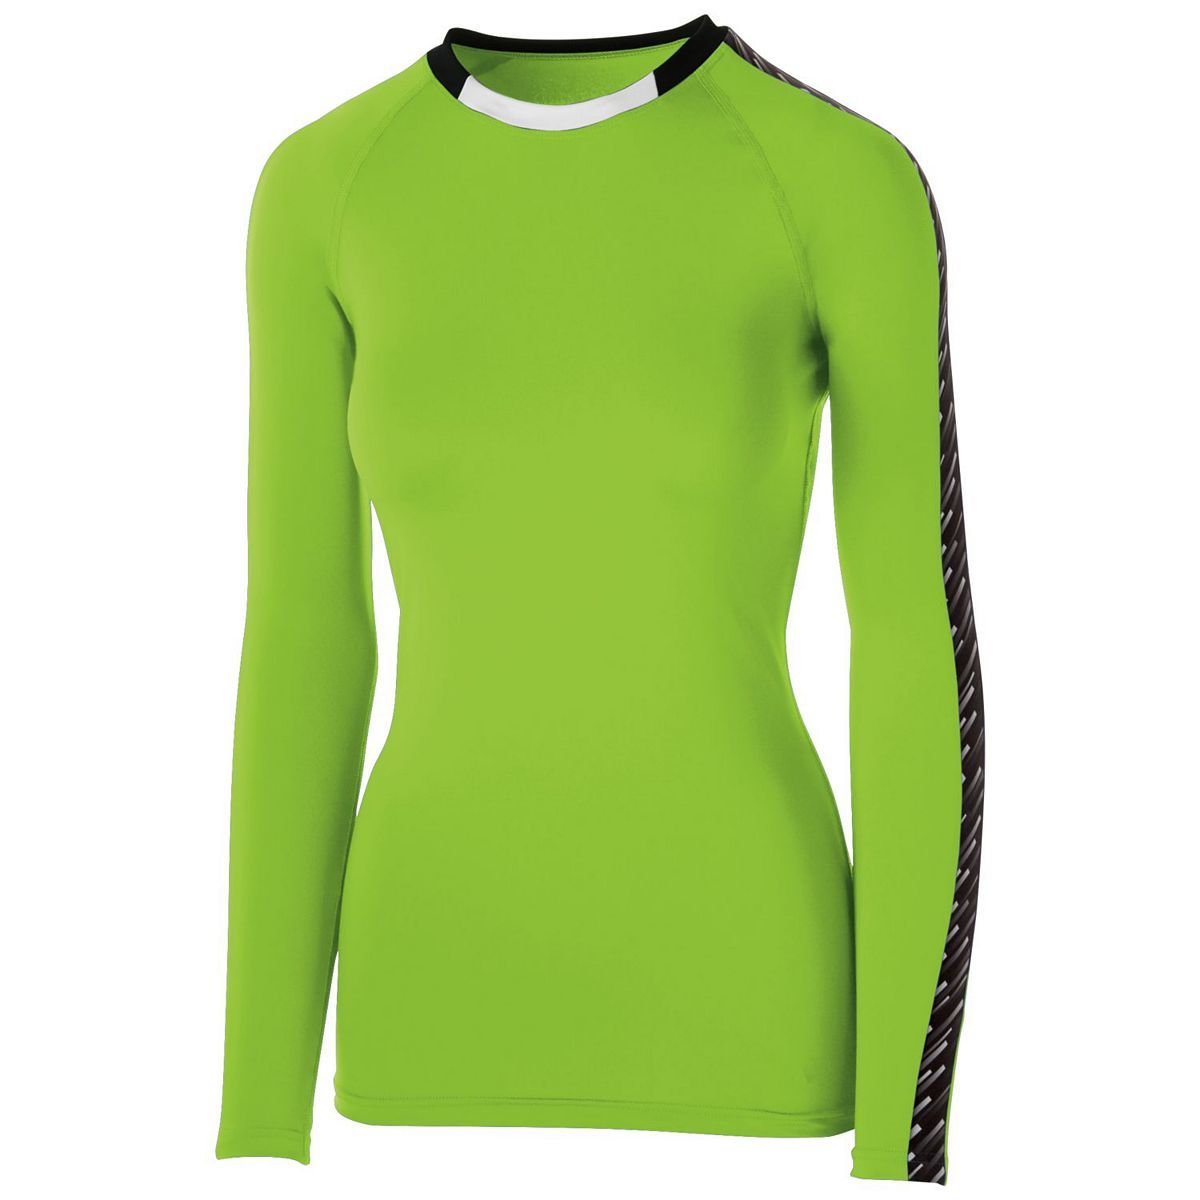 High 5 Ladies Spectrum Long Sleeve Jersey in Lime/Black/White  -Part of the Ladies, Ladies-Jersey, High5-Products, Volleyball, Shirts product lines at KanaleyCreations.com